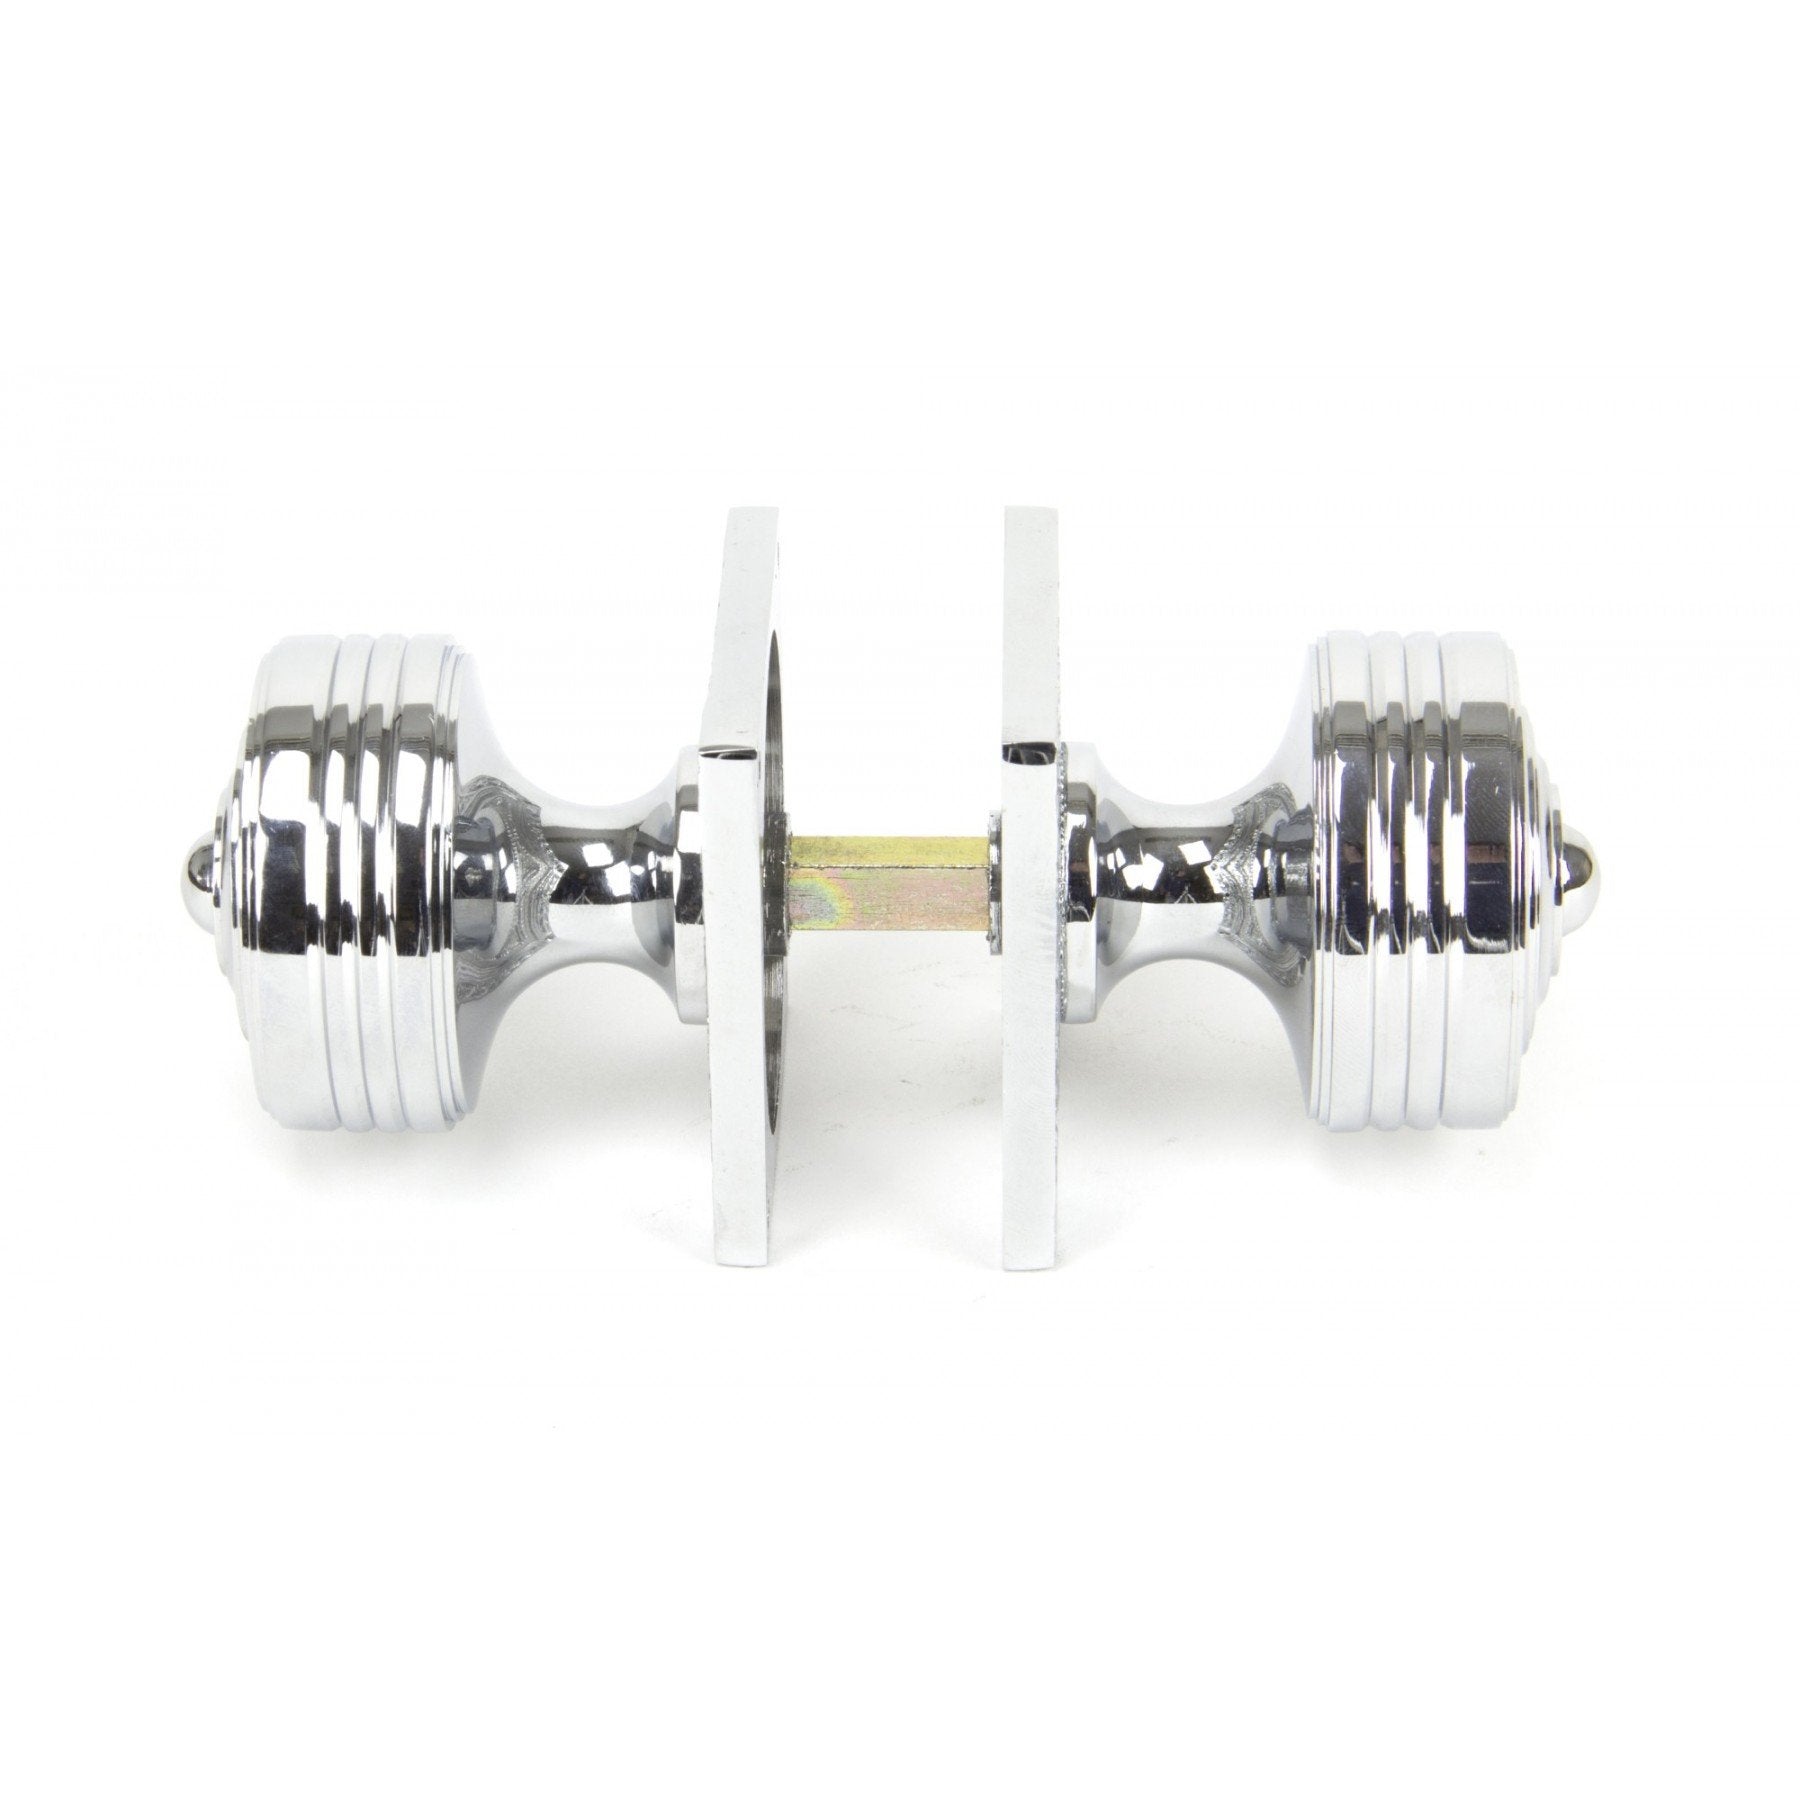 From the Anvil Polished Chrome Tewkesbury Square Mortice Knob Set - No.42 Interiors